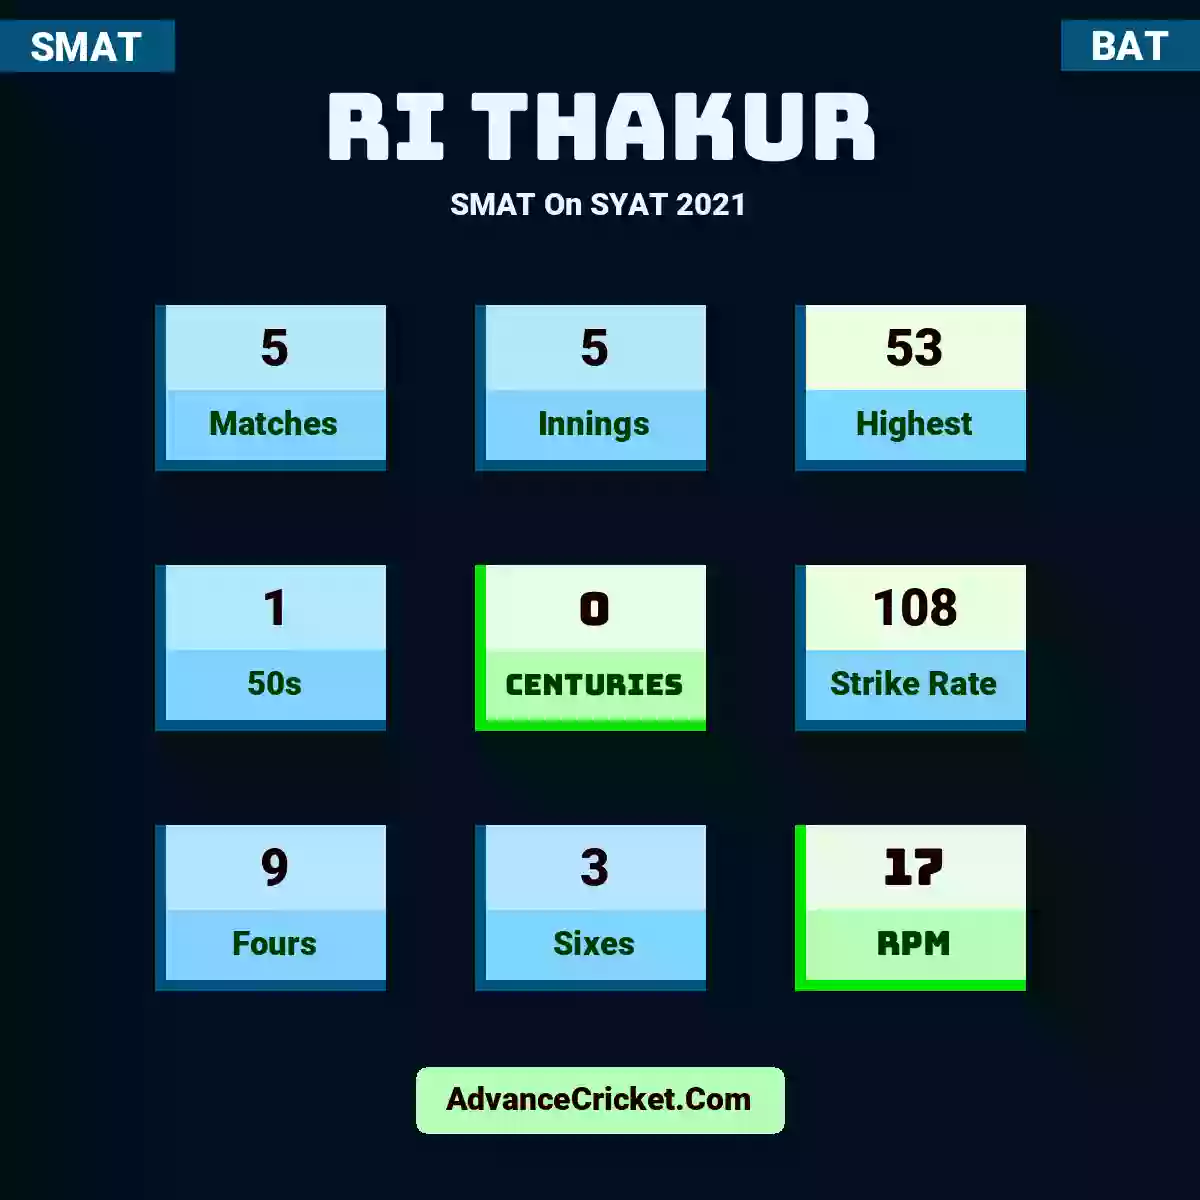 RI Thakur SMAT  On SYAT 2021, RI Thakur played 5 matches, scored 53 runs as highest, 1 half-centuries, and 0 centuries, with a strike rate of 108. R.Thakur hit 9 fours and 3 sixes, with an RPM of 17.